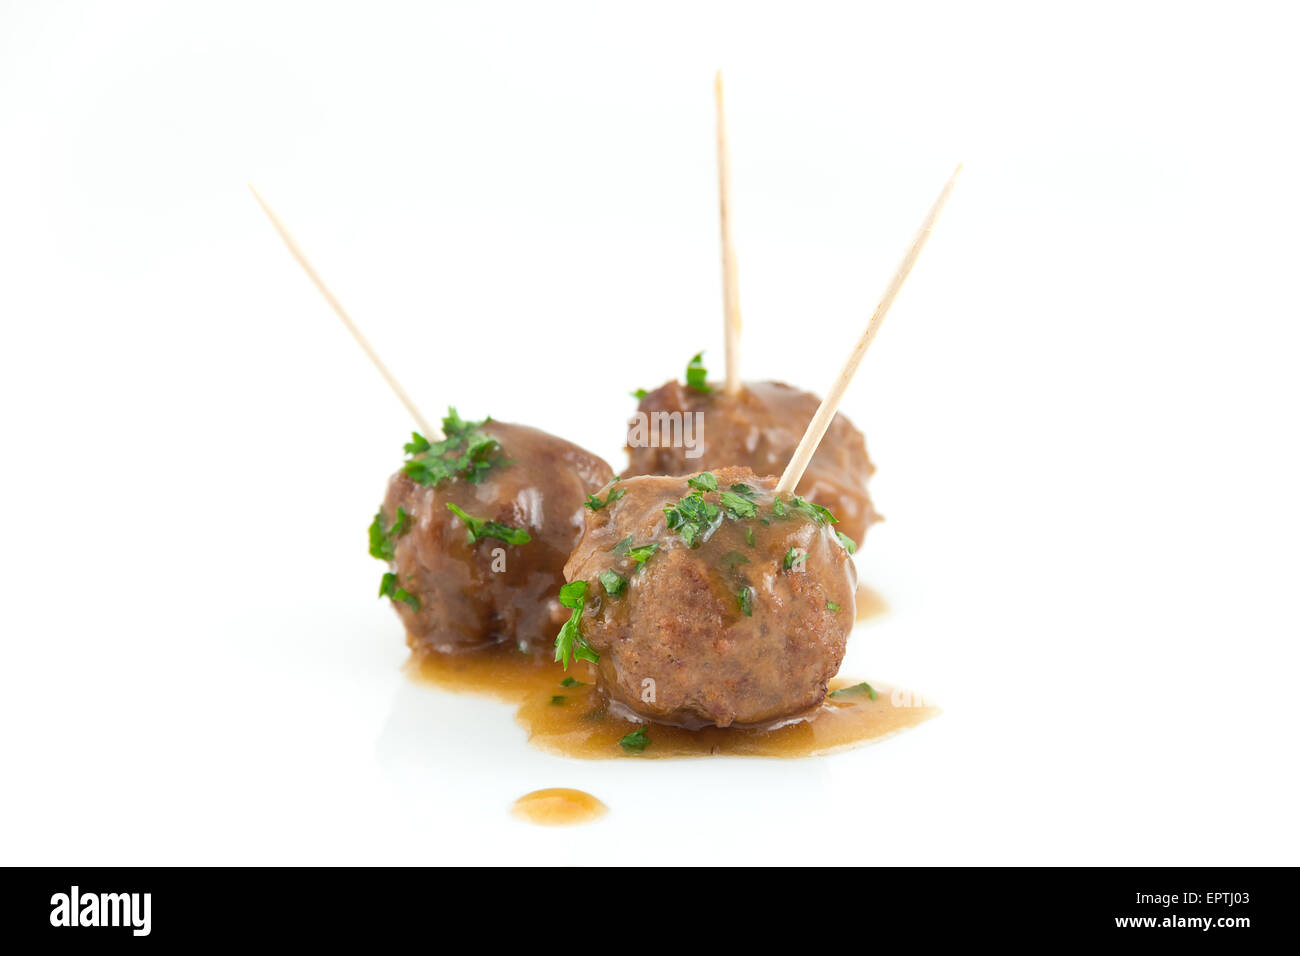 Delicious Swedish meatballs with a hearty brown sauce Stock Photo